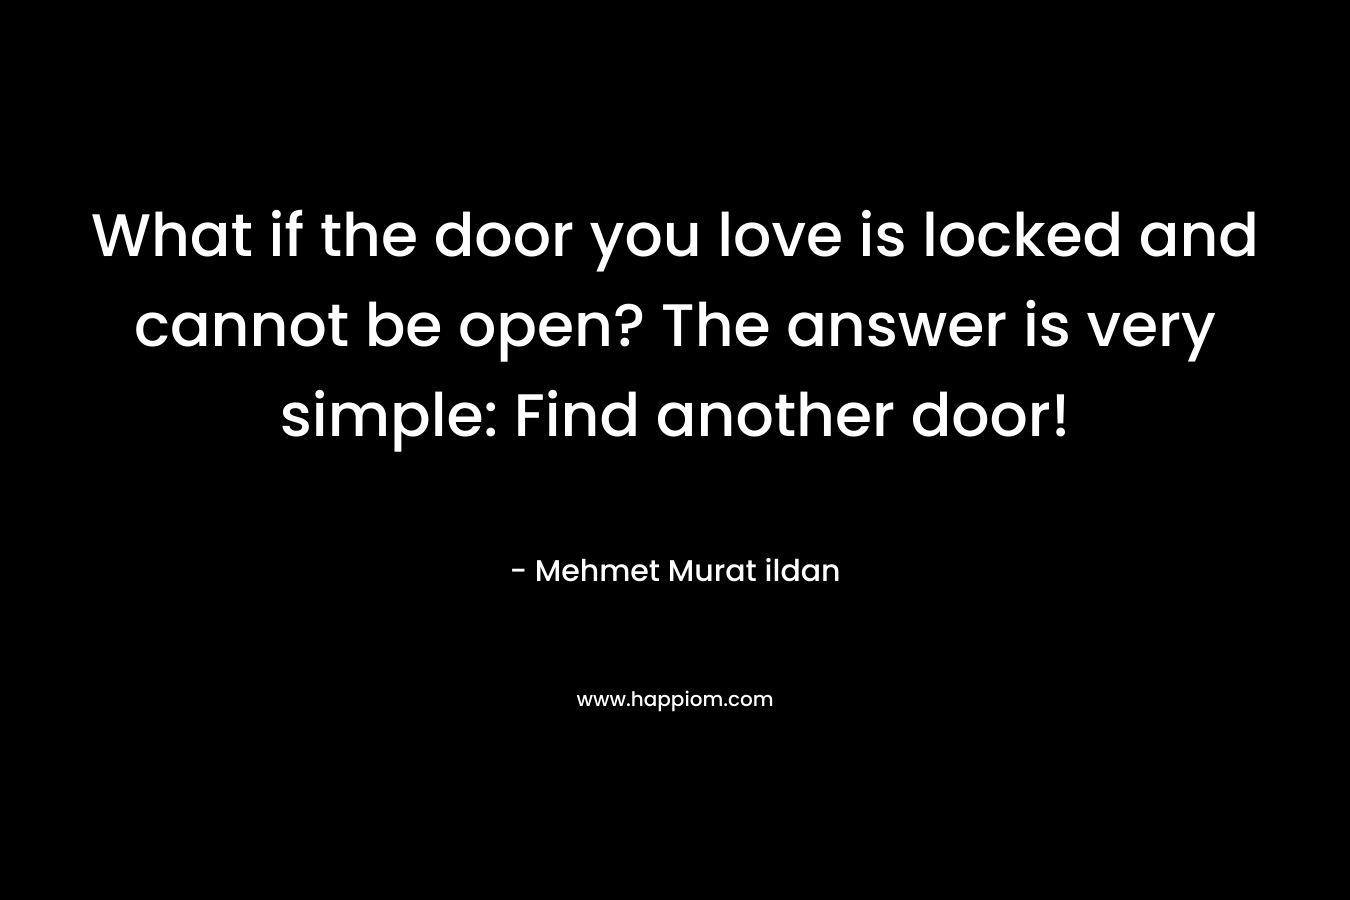 What if the door you love is locked and cannot be open? The answer is very simple: Find another door!